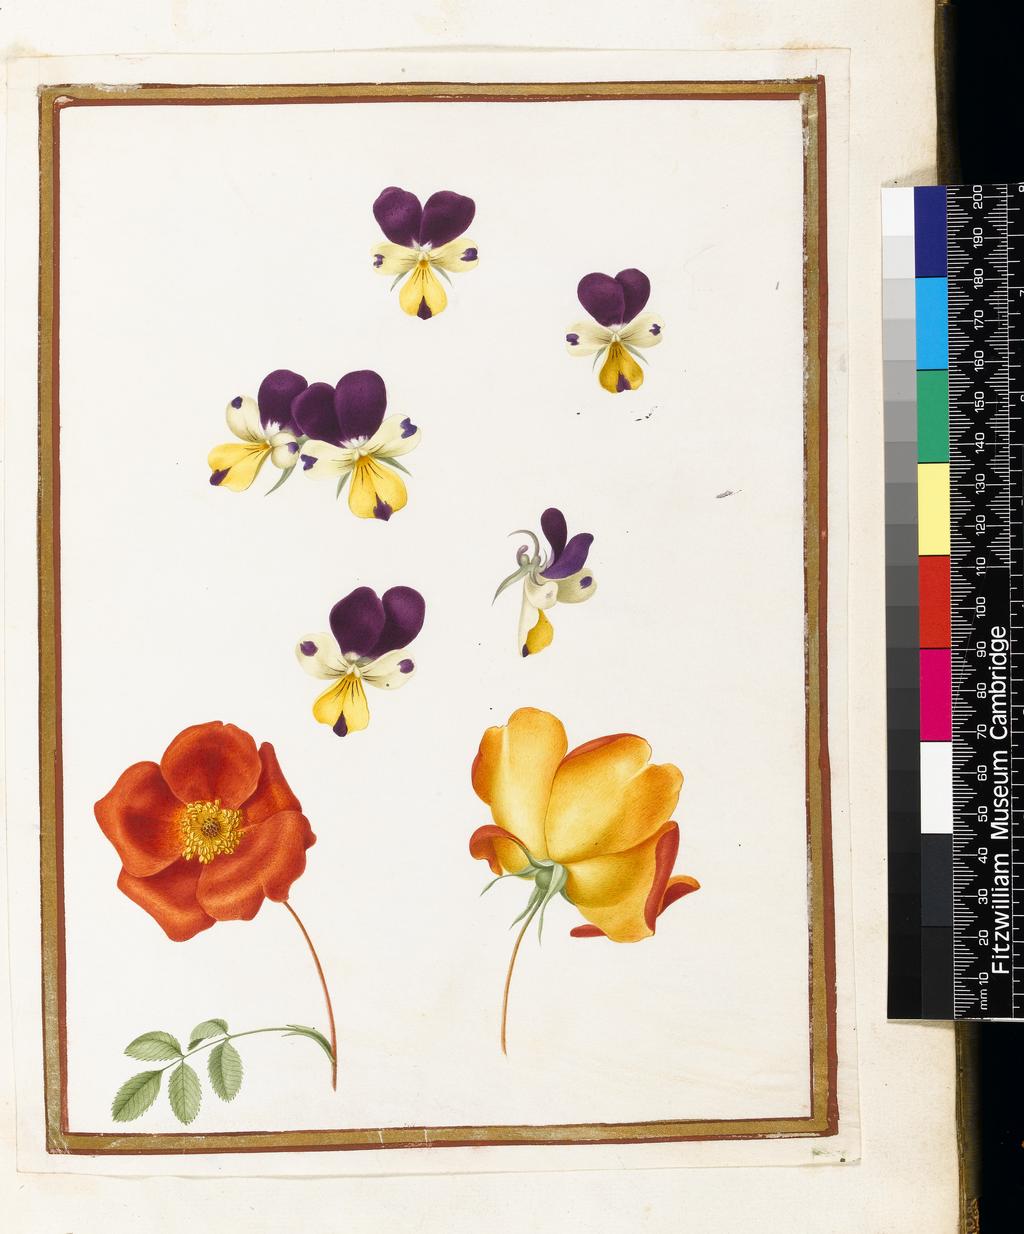 An image of Six heads of pansies, two rosa foetida (Austrian briar). Robert, Nicolas attributed to (French, 1614-1685). Graphite, watercolour and bodycolour on vellum, height 272 mm, width 208 mm. Album containing 62 botanical drawings on vellum tipped in on the gilt-edged pages of the album which bear the watermark of an 18th century French paper-maker, Malmenayde of Thiers (active from 1731). Bound in red morocco with clasps, the spine tooled in gilt. The Pages are interleaved with thin protective paper. Ruled lines of red and gold border the drawings on all sides. 17th Century. French.